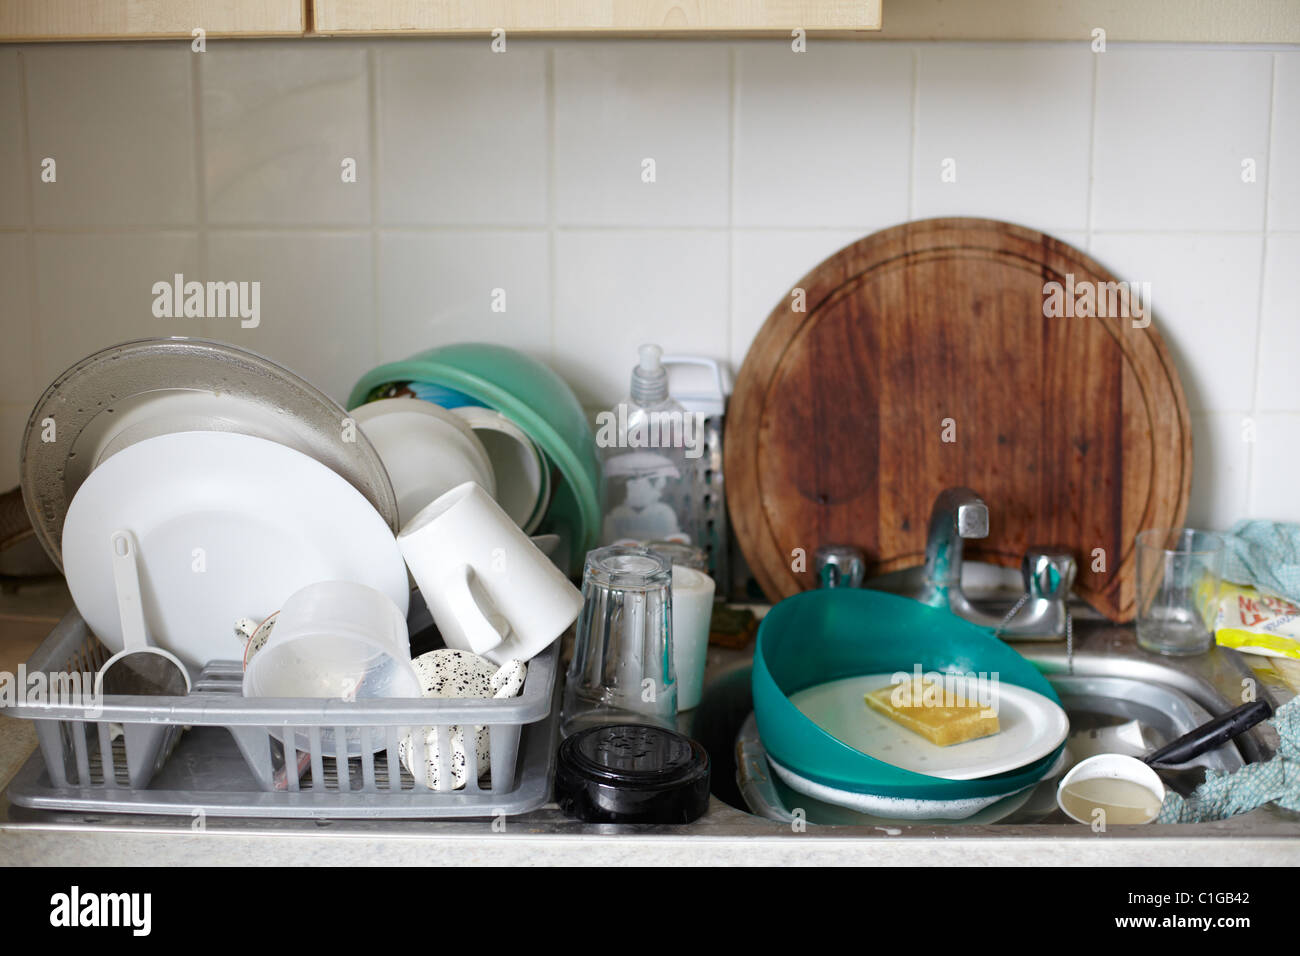 Messy sink with dirty sink Stock Photo - Alamy